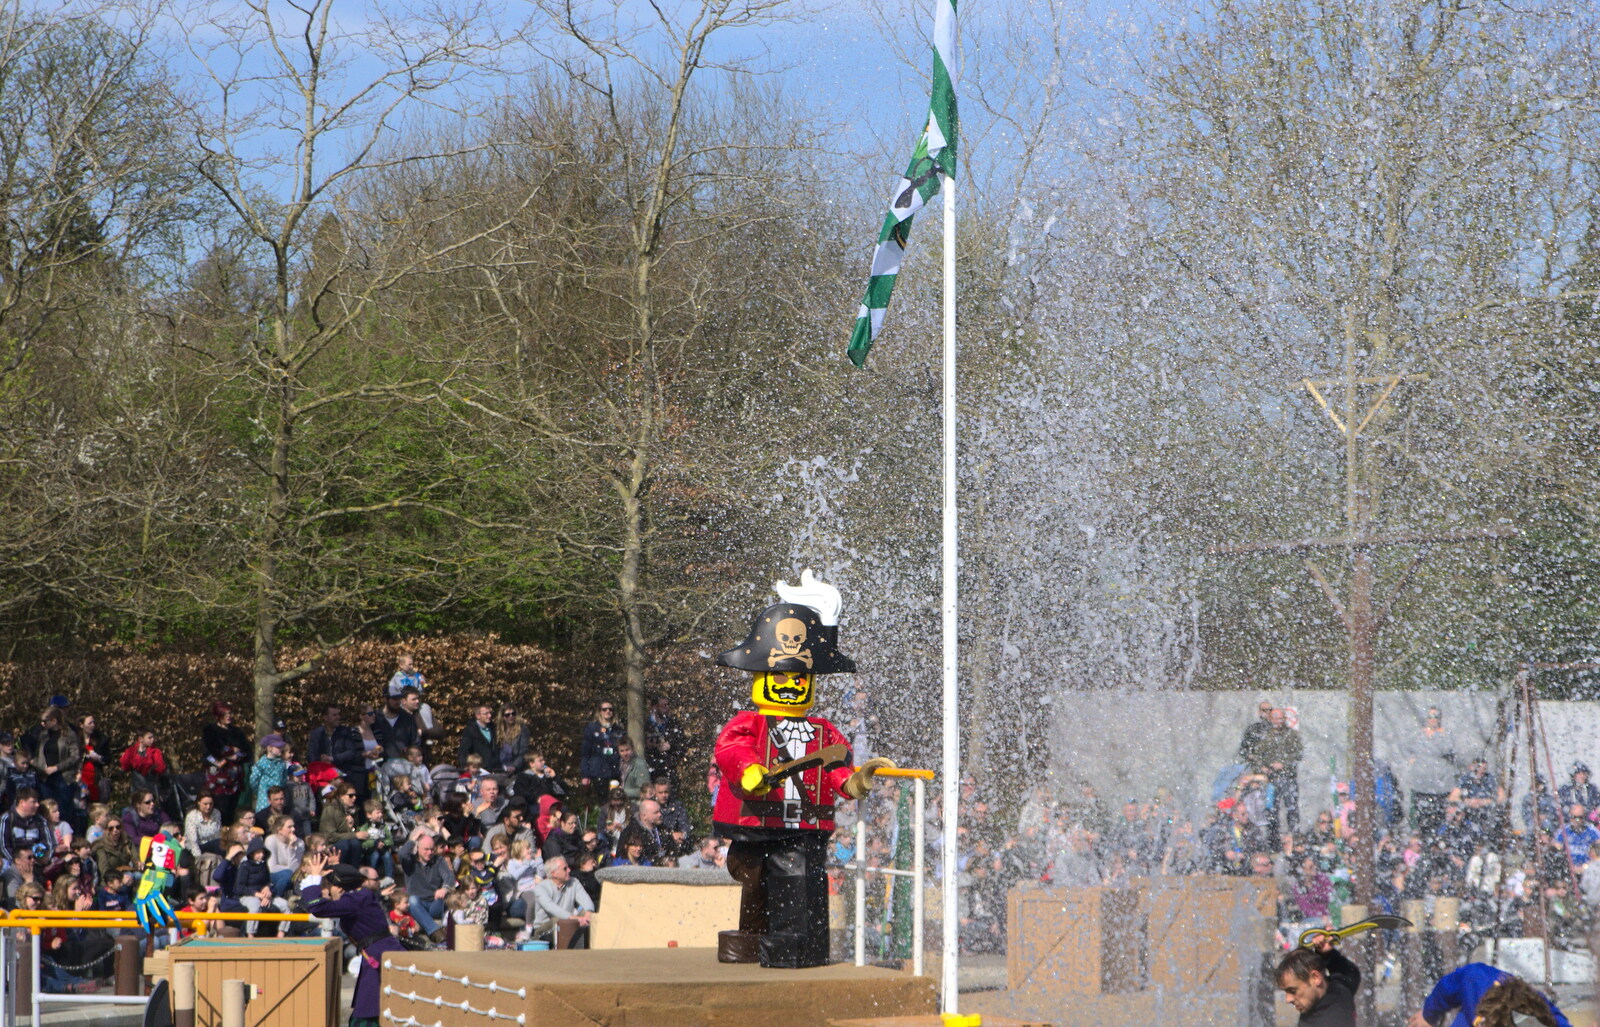 There's an explosion of water from A Trip to Legoland, Windsor, Berkshire - 25th March 2017